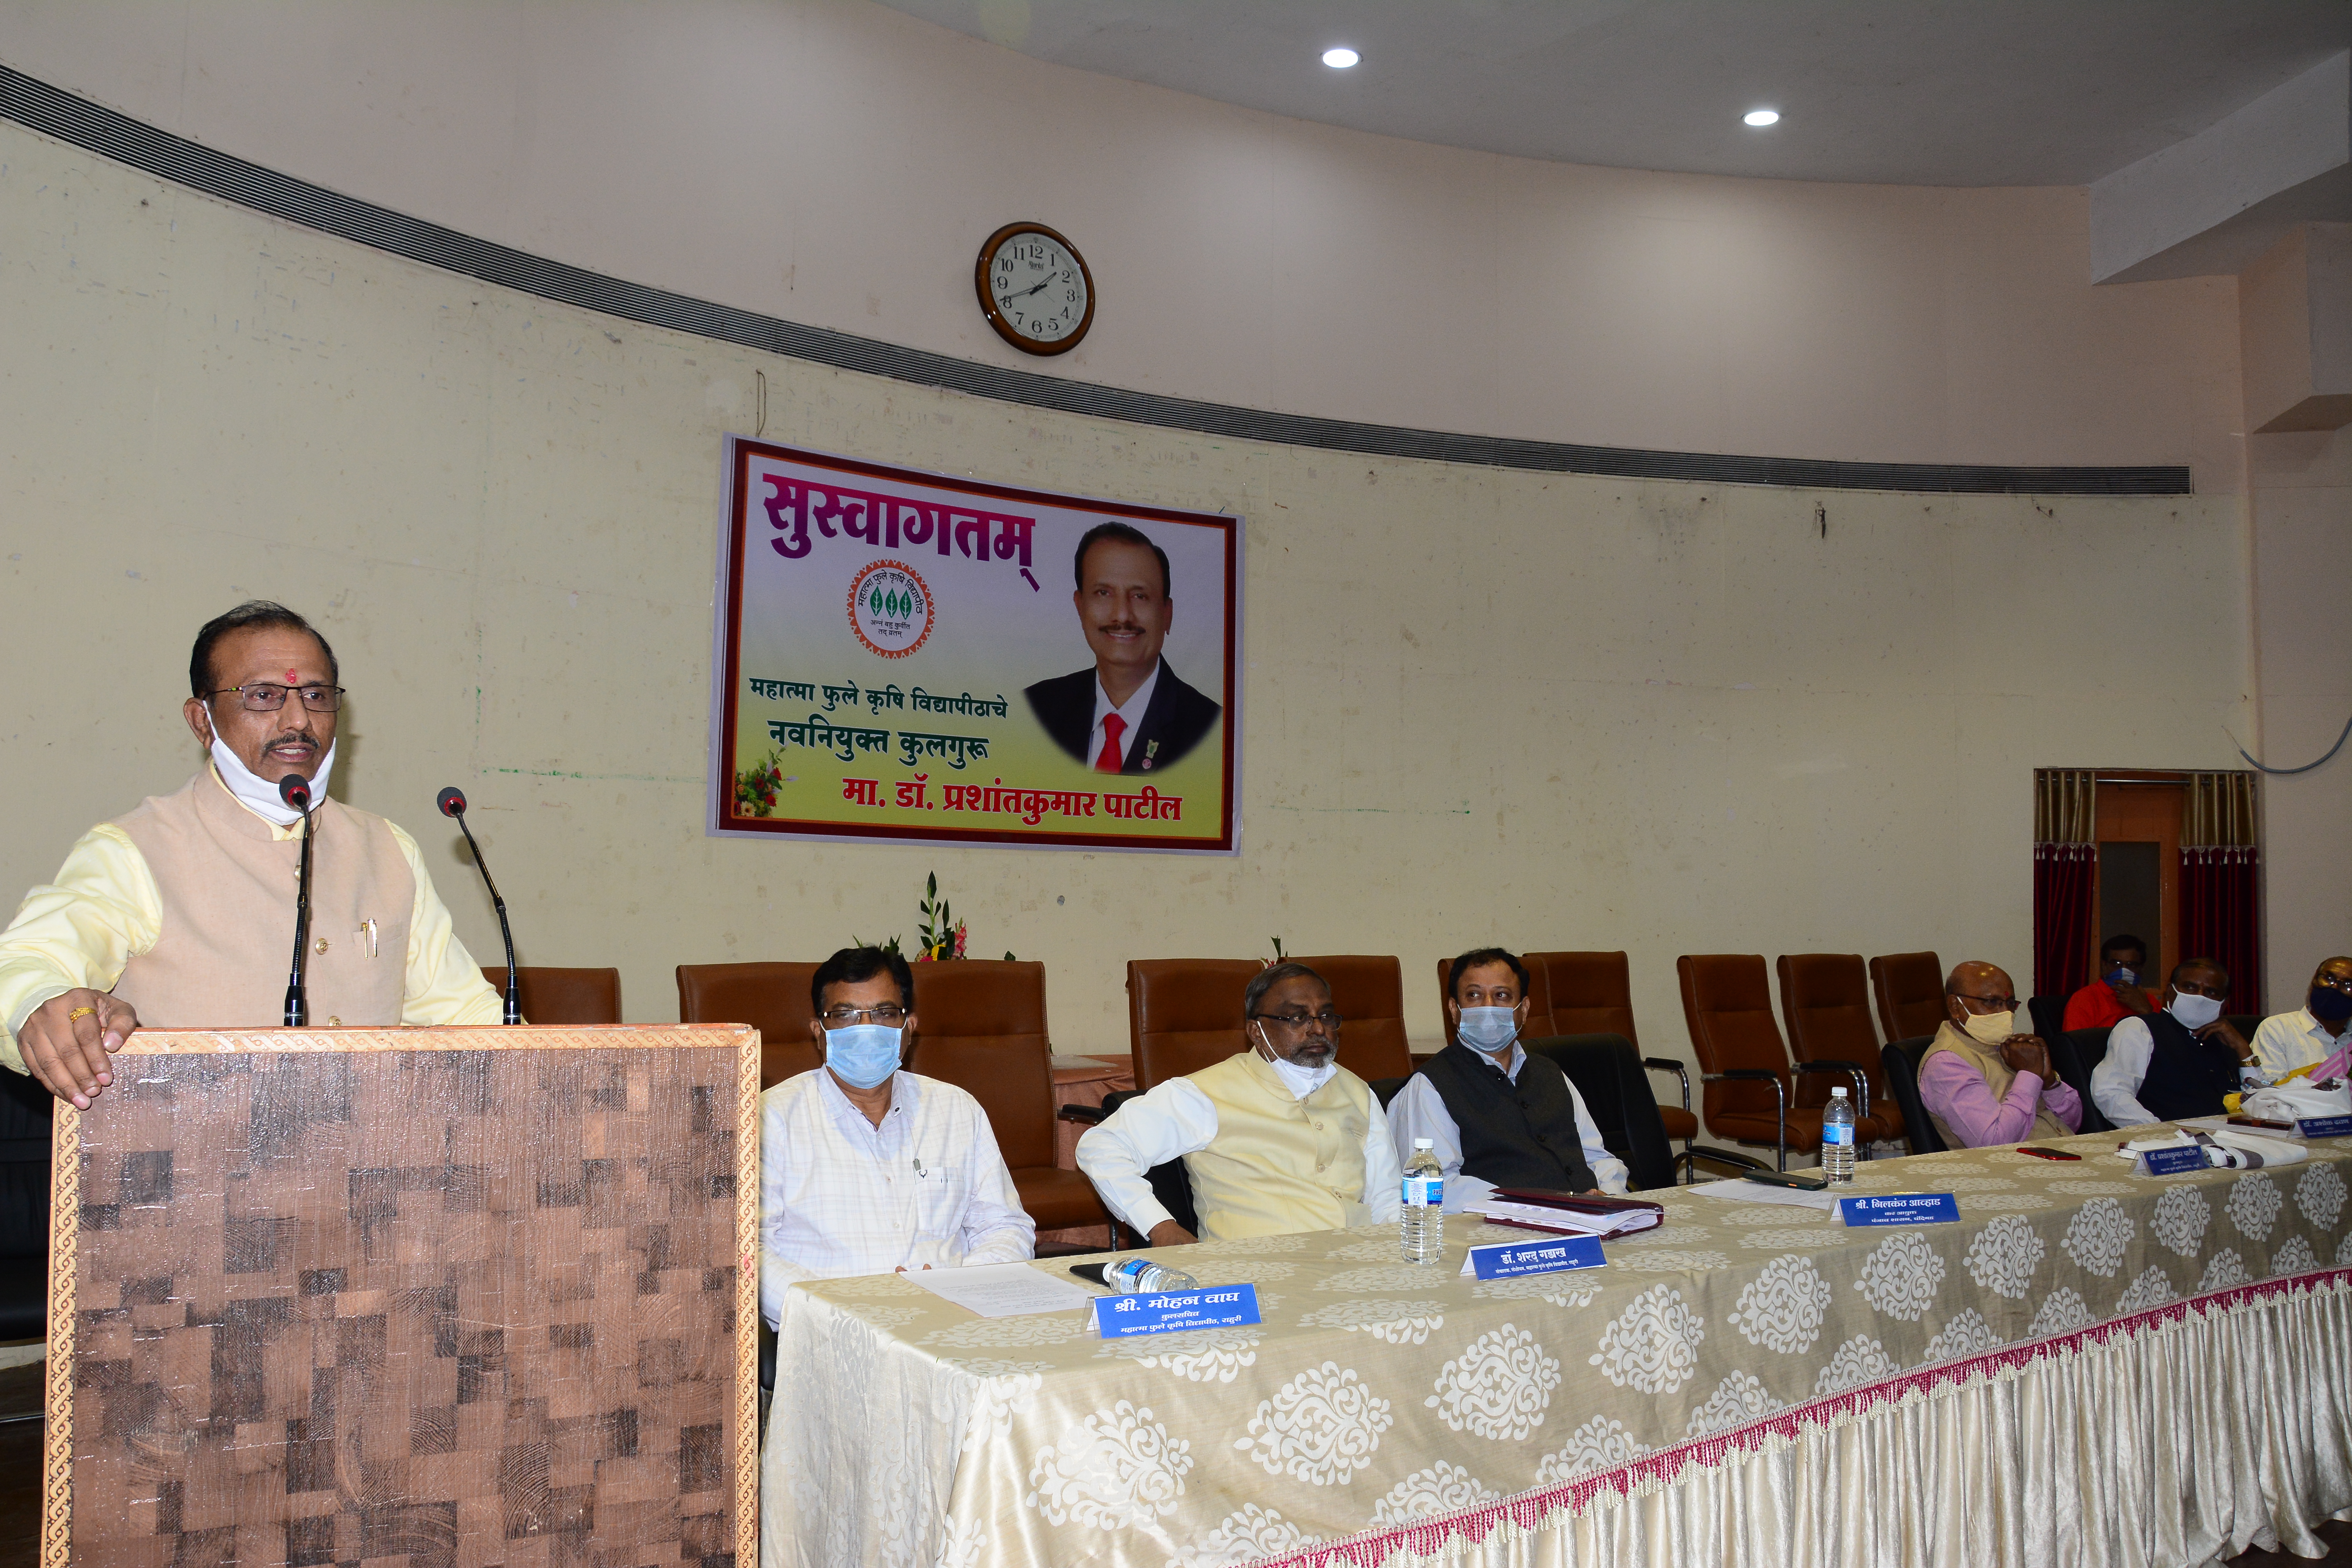 Welcome of Vice Chancellor Dr. P. G. Patil